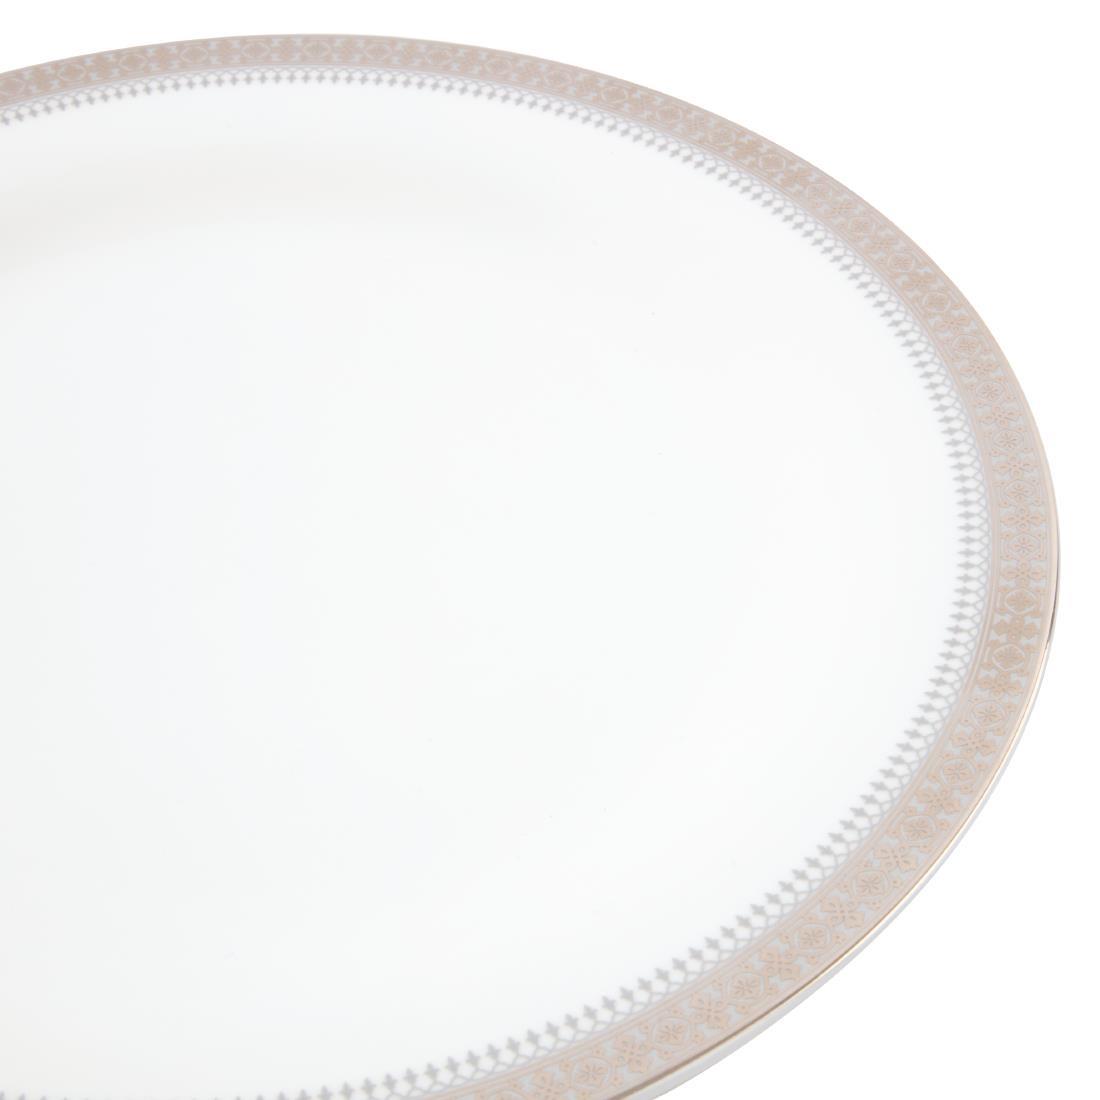 Royal Bone Afternoon Tea Couronne Plate 255mm (Pack of 6) - FB738  - 2